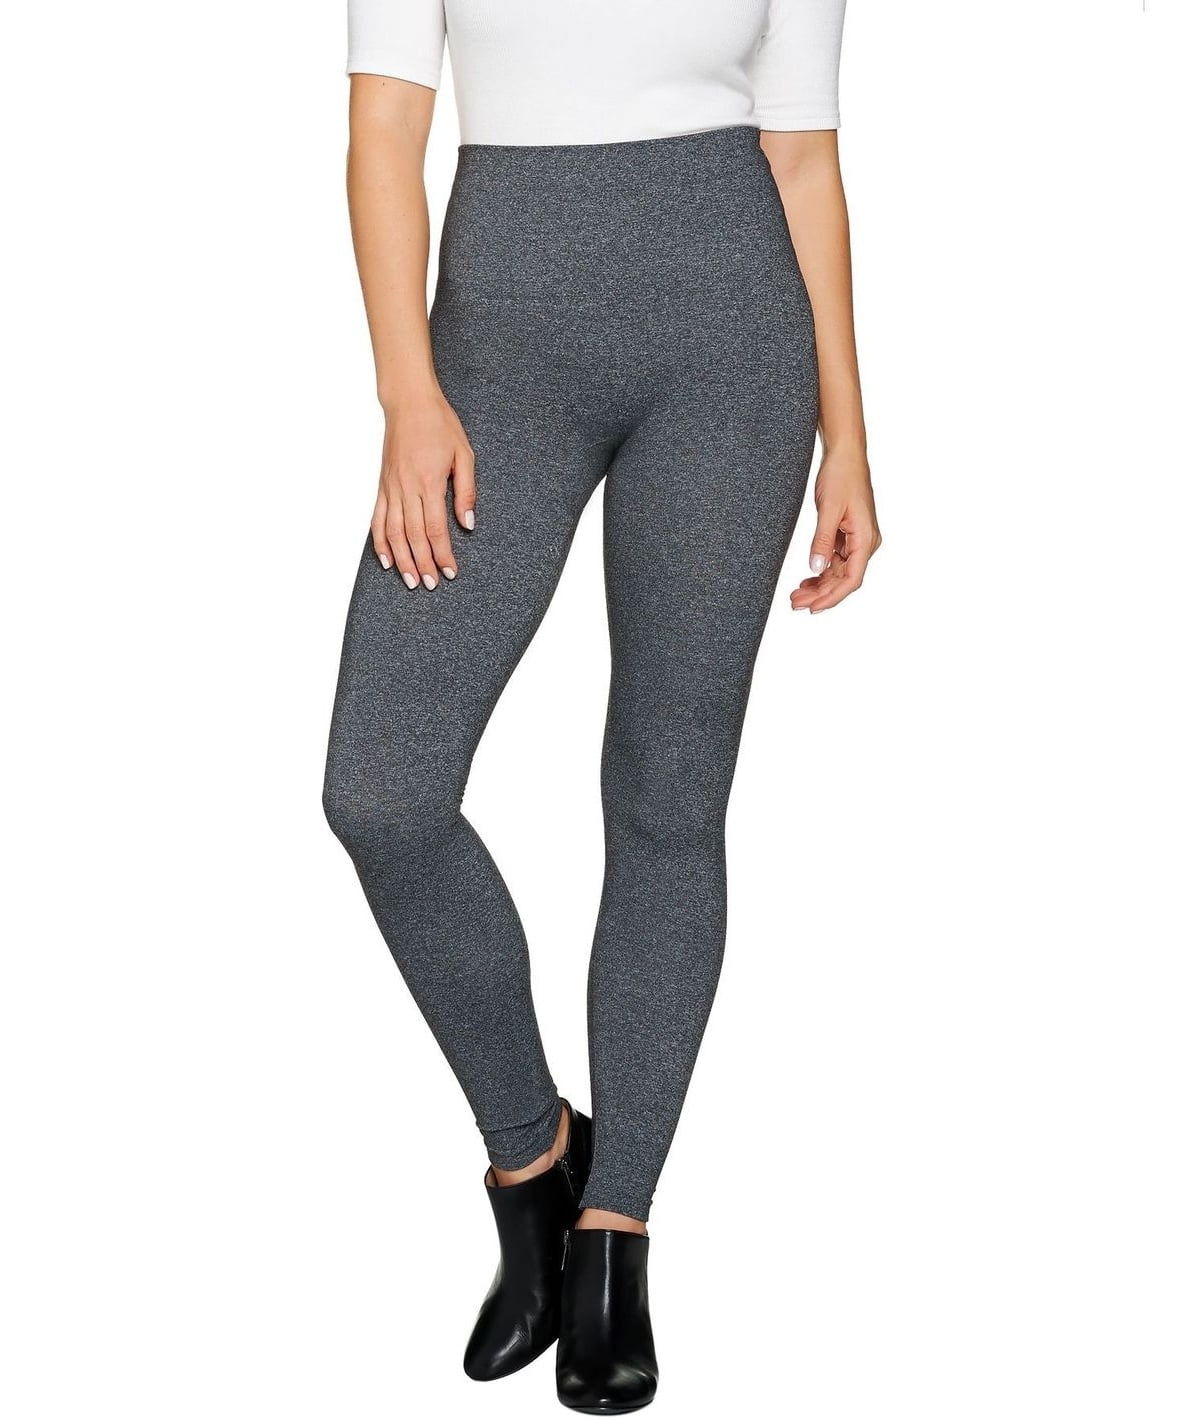 Spanx Leggings For Sale Near Me Edmunds  International Society of  Precision Agriculture